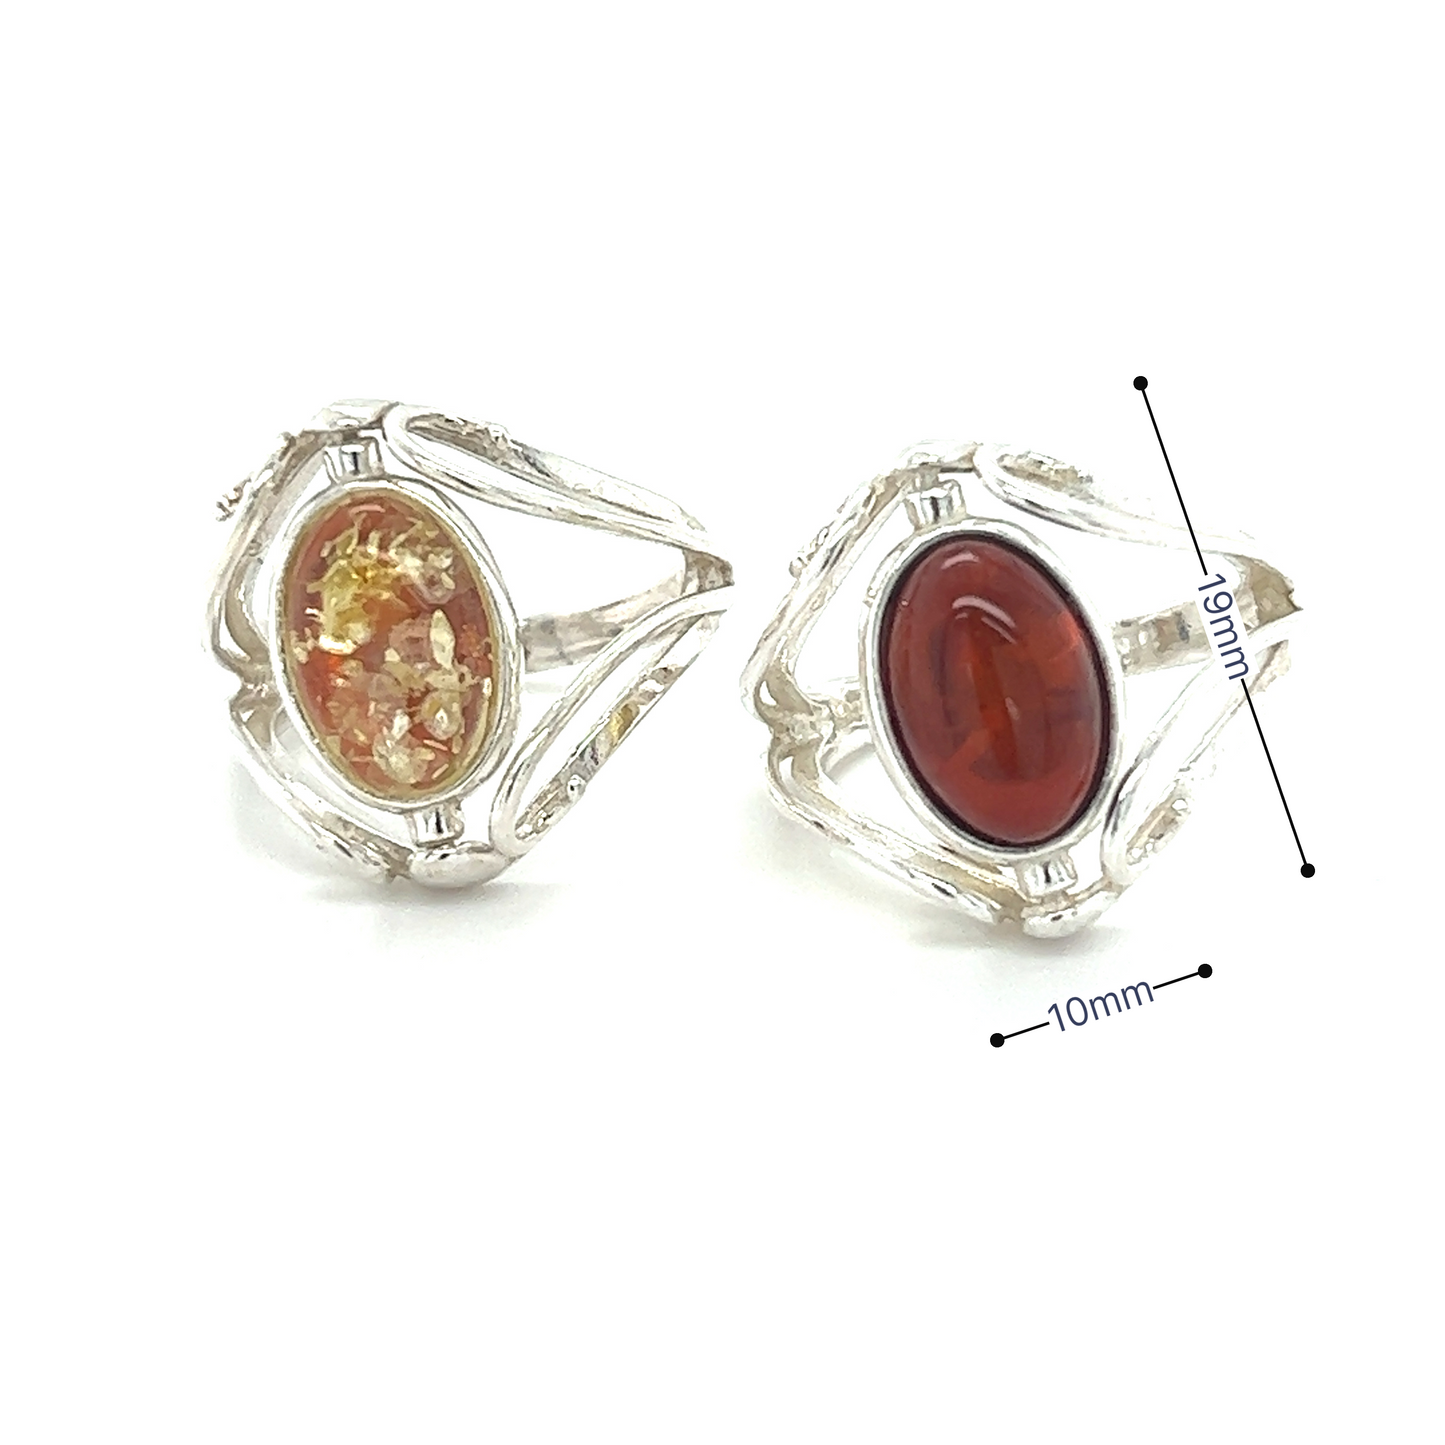 A statement Rotating Lemon and Cherry Amber Ring with a Baltic amber stone and a cherry amber stone by Super Silver.